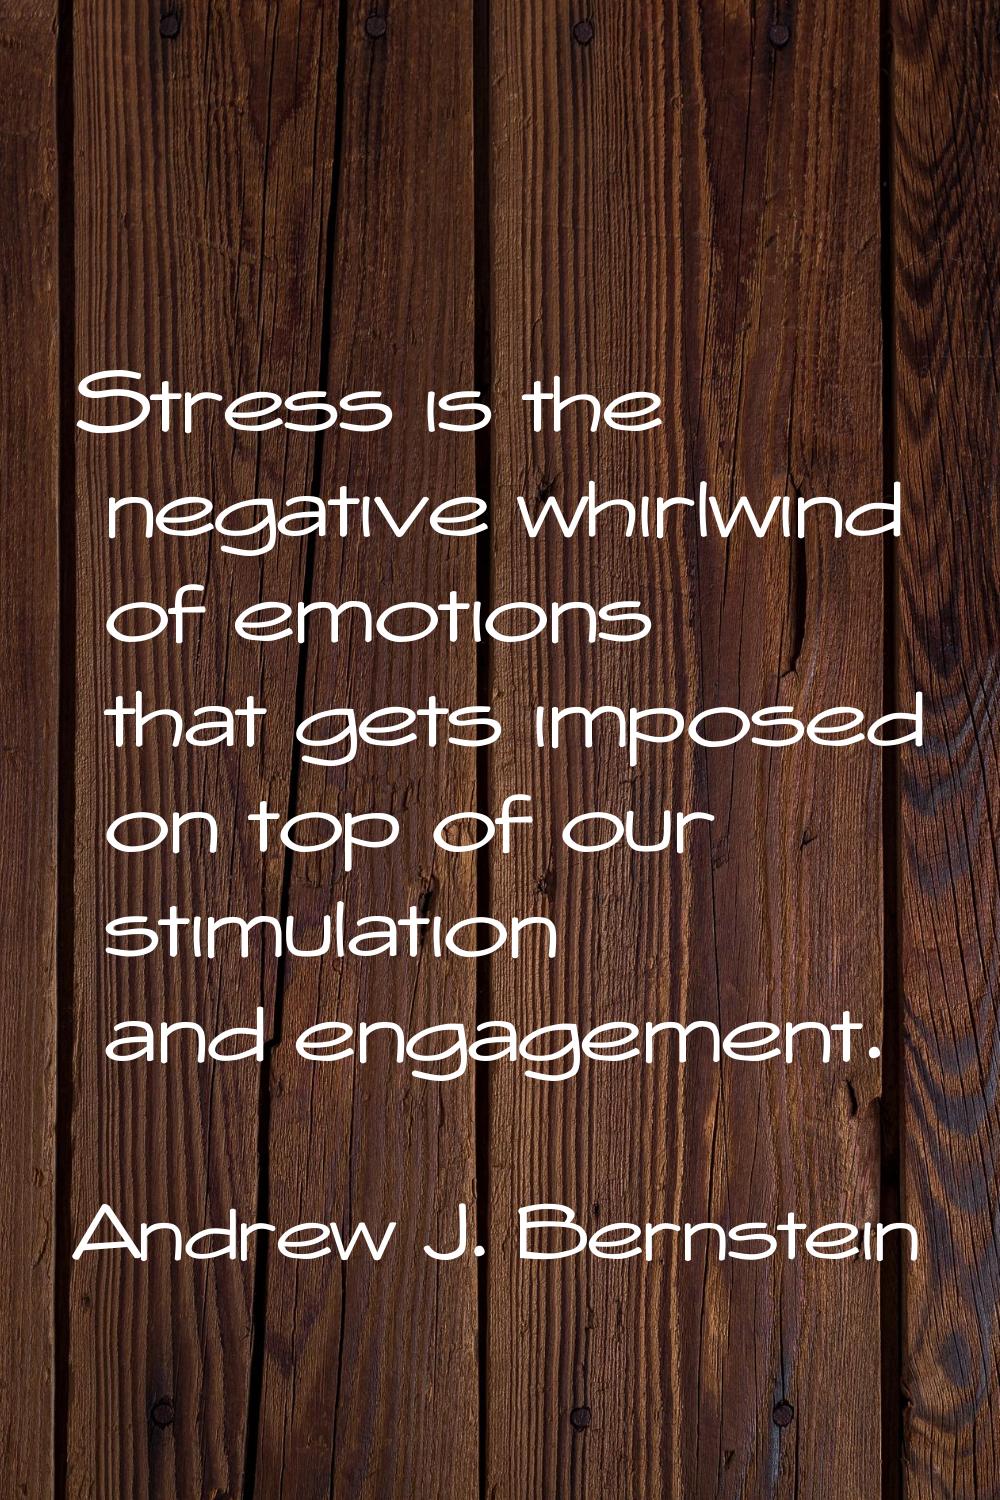 Stress is the negative whirlwind of emotions that gets imposed on top of our stimulation and engage